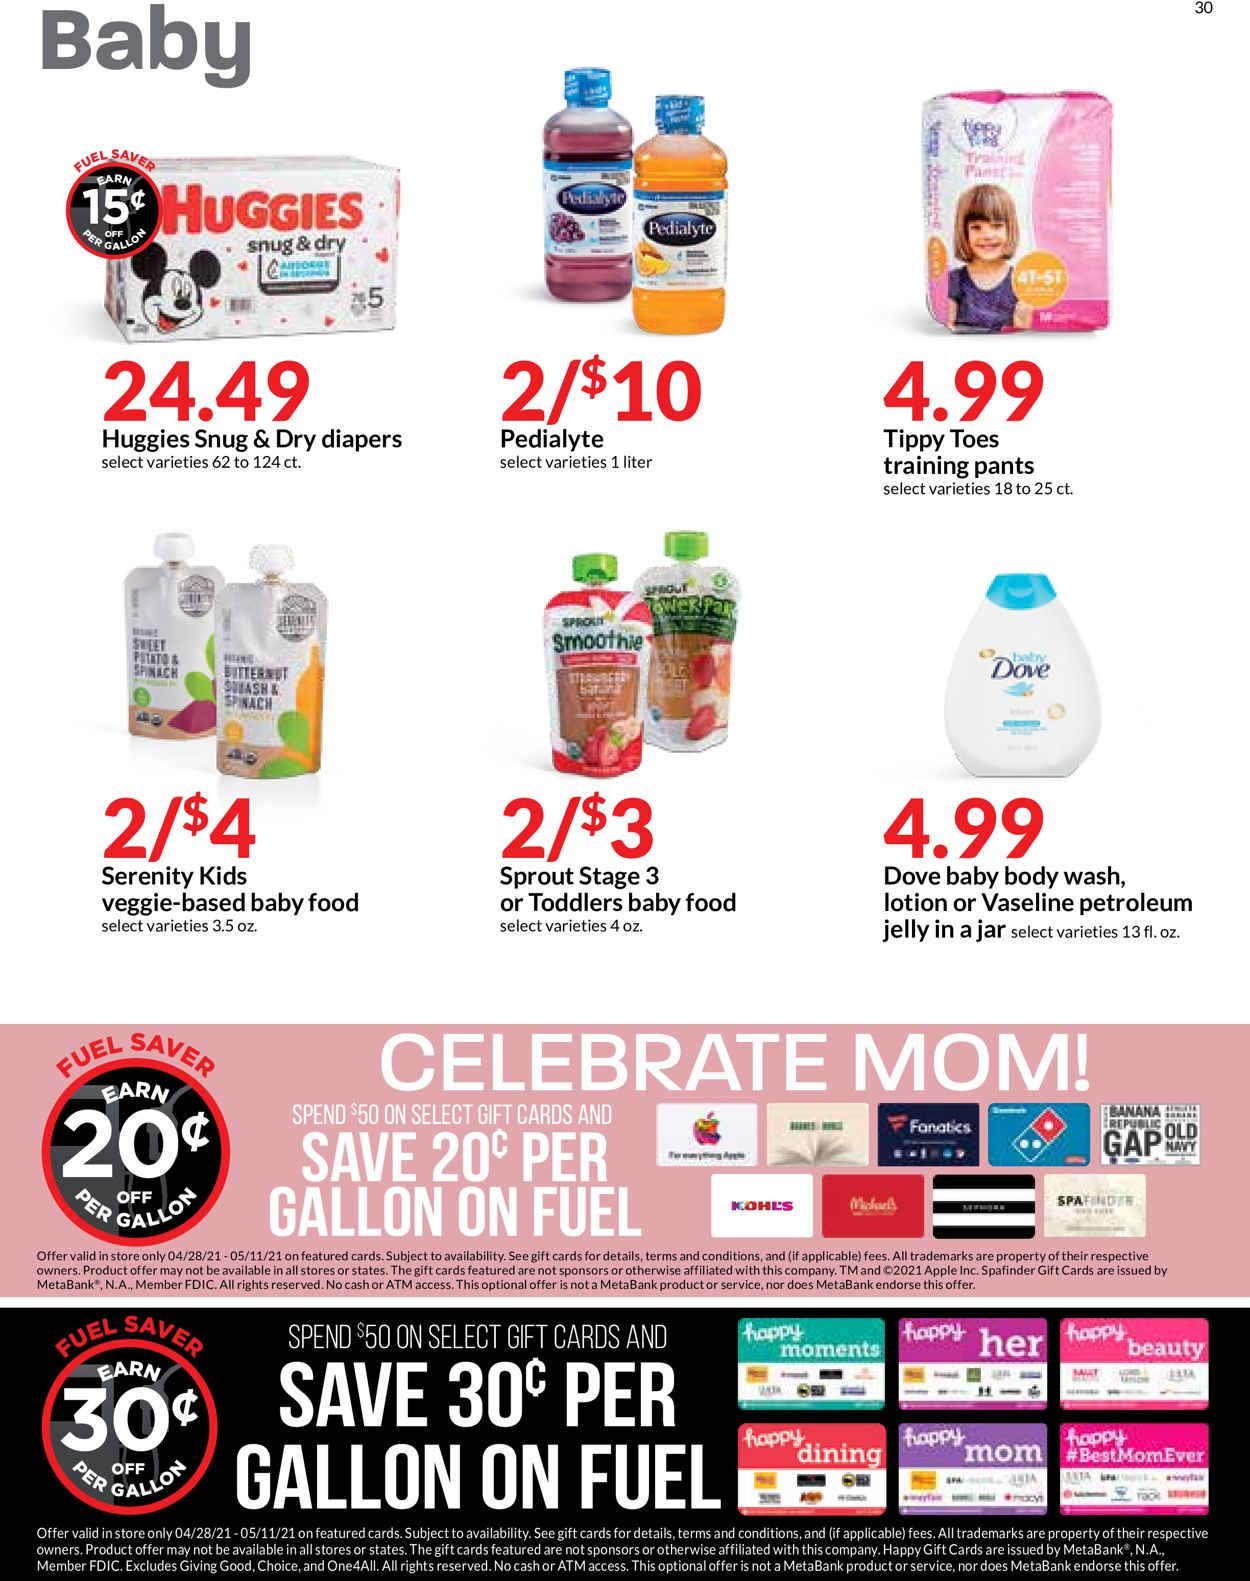 HyVee Current weekly ad 04/28 05/04/2021 [30]